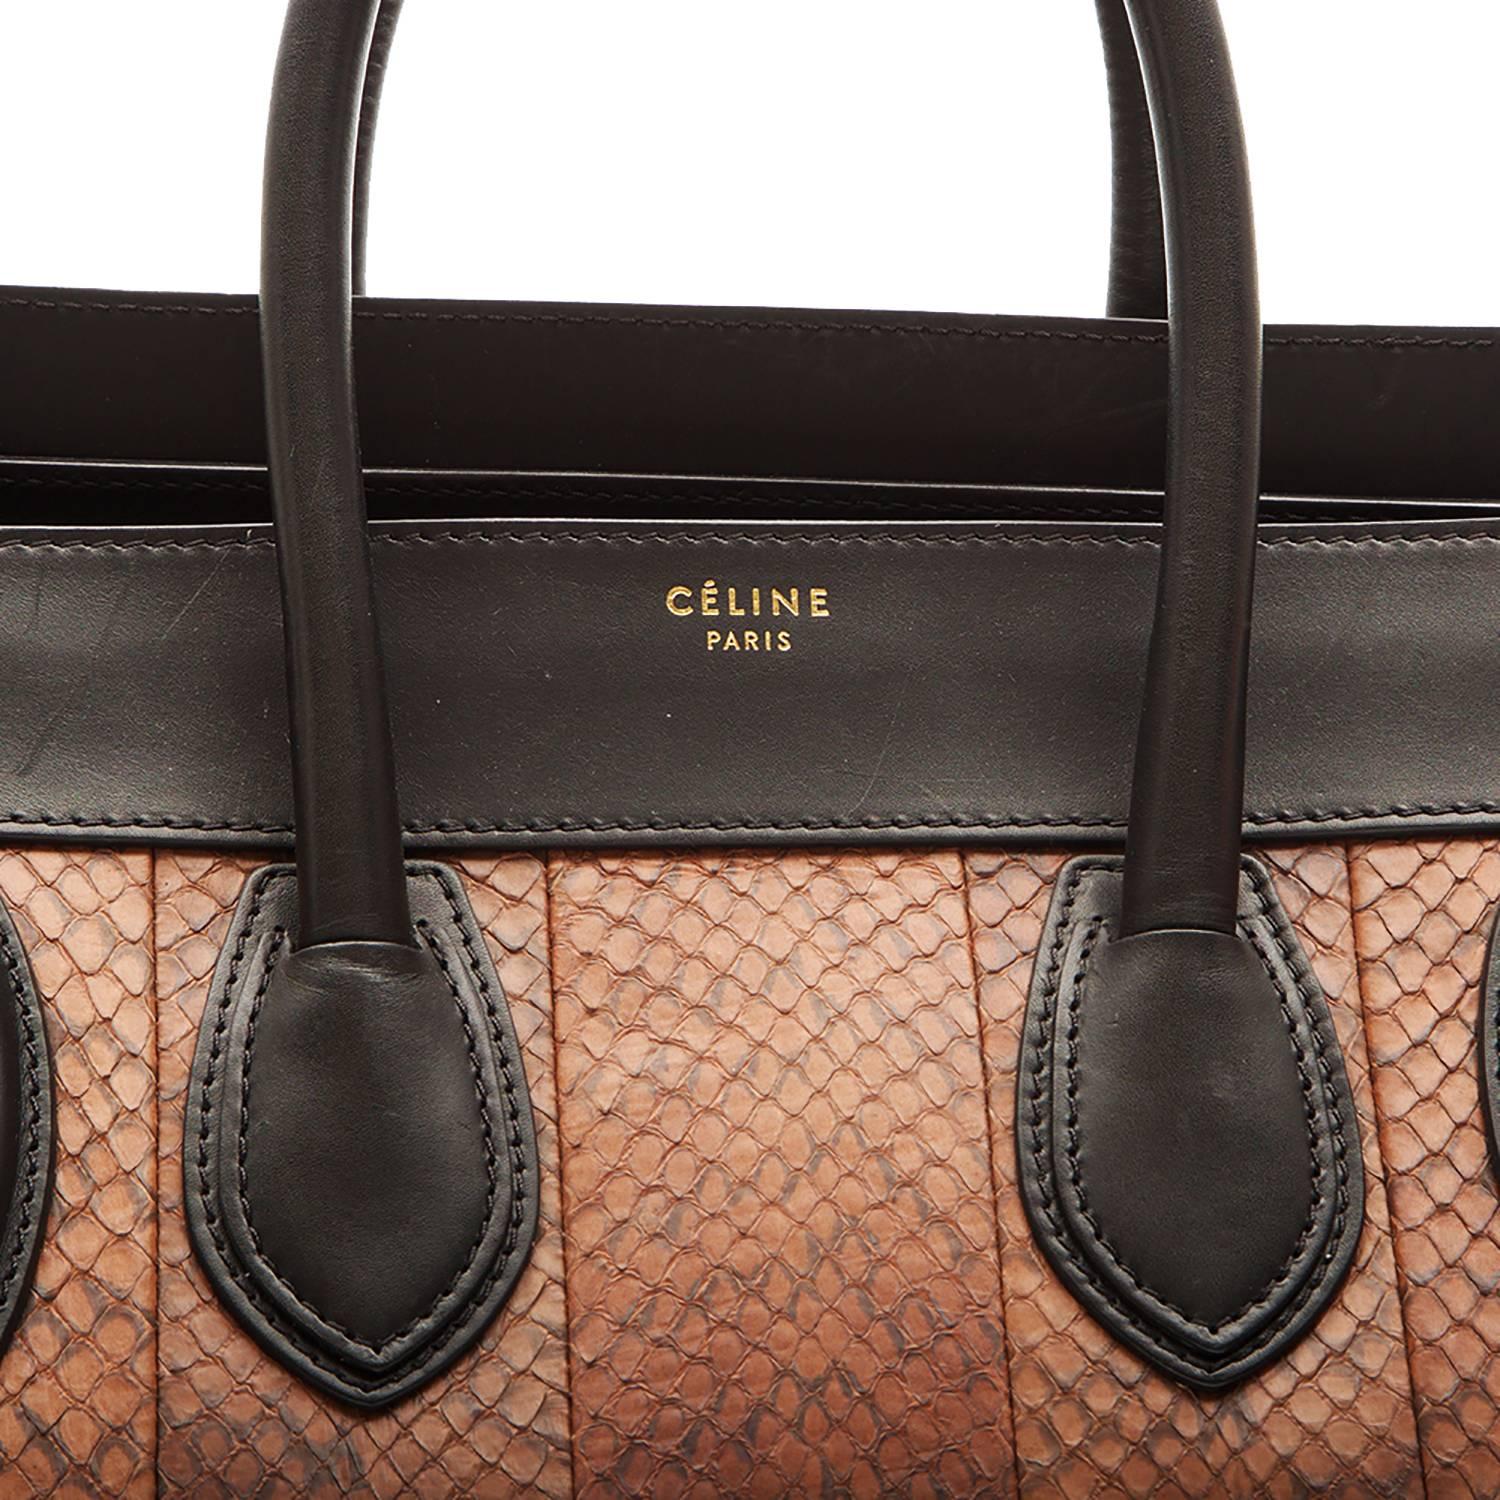 In its largest size, this edition of the iconic Céline bag features brown panels against black and white calfskin. Offset with gold-tone finishings, it features Céline branding across its profile, a zipper closure, an outer zipper pocket, and three